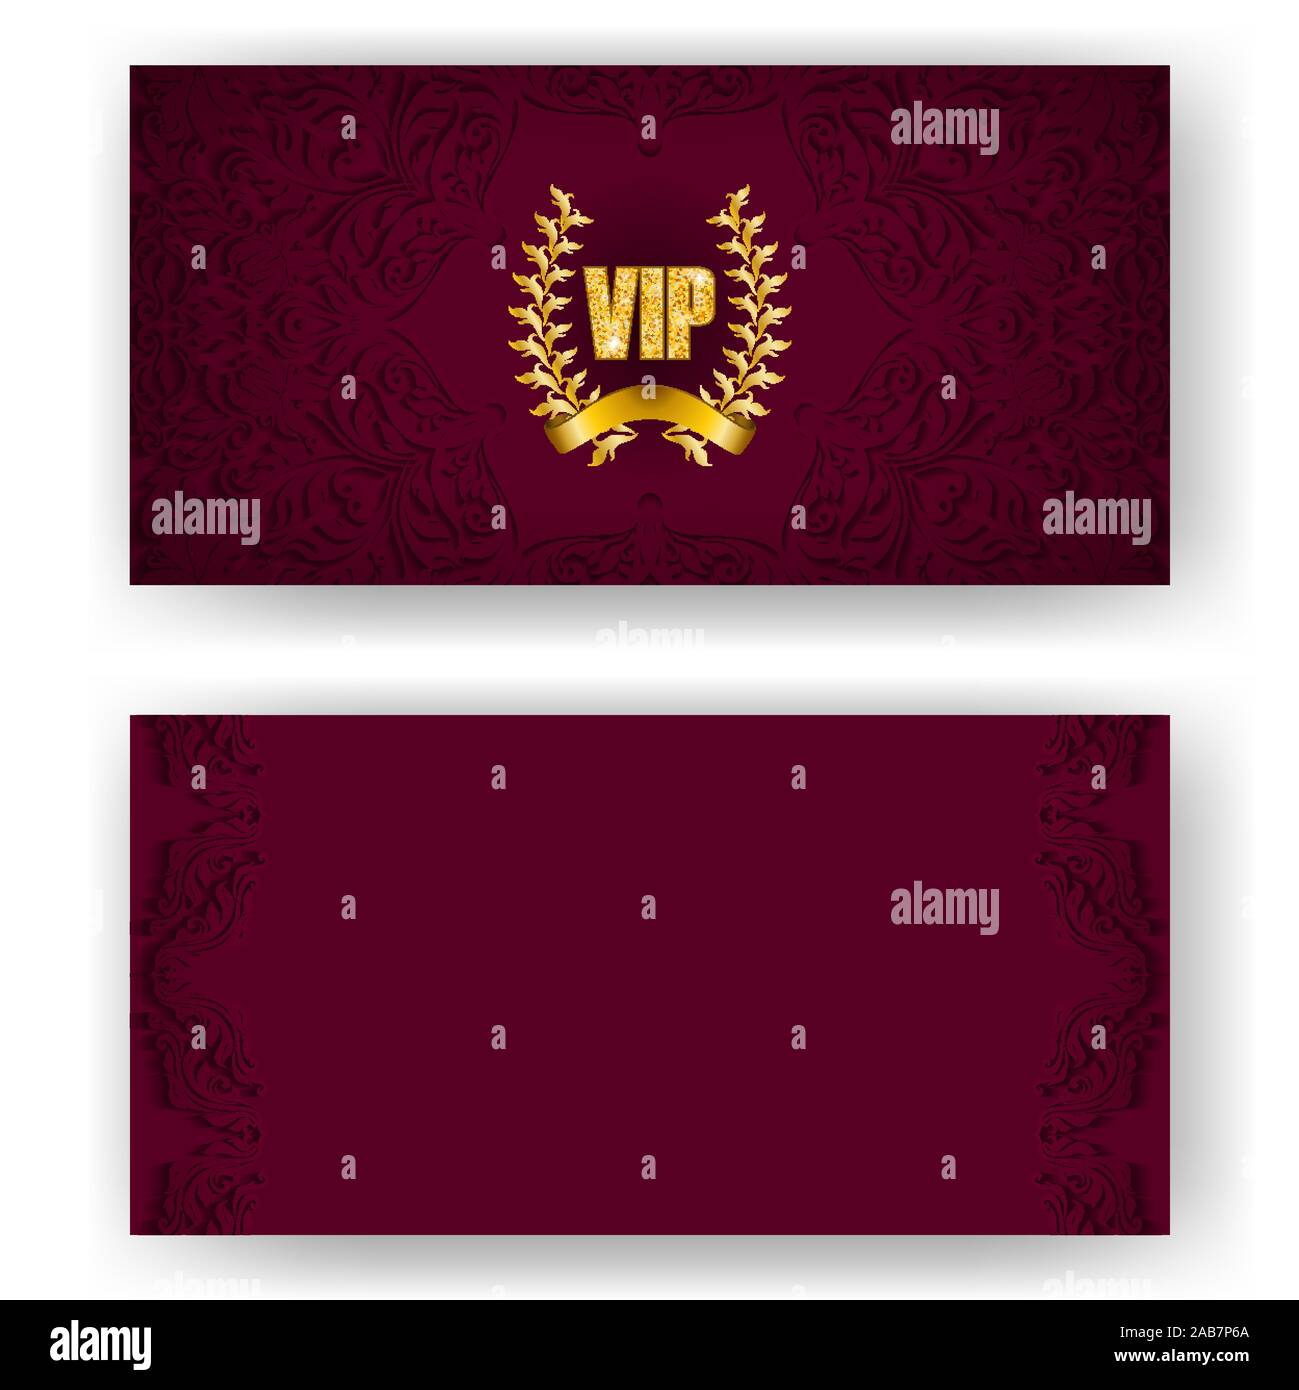 5,800+ Vip Membership Card Stock Photos, Pictures & Royalty-Free